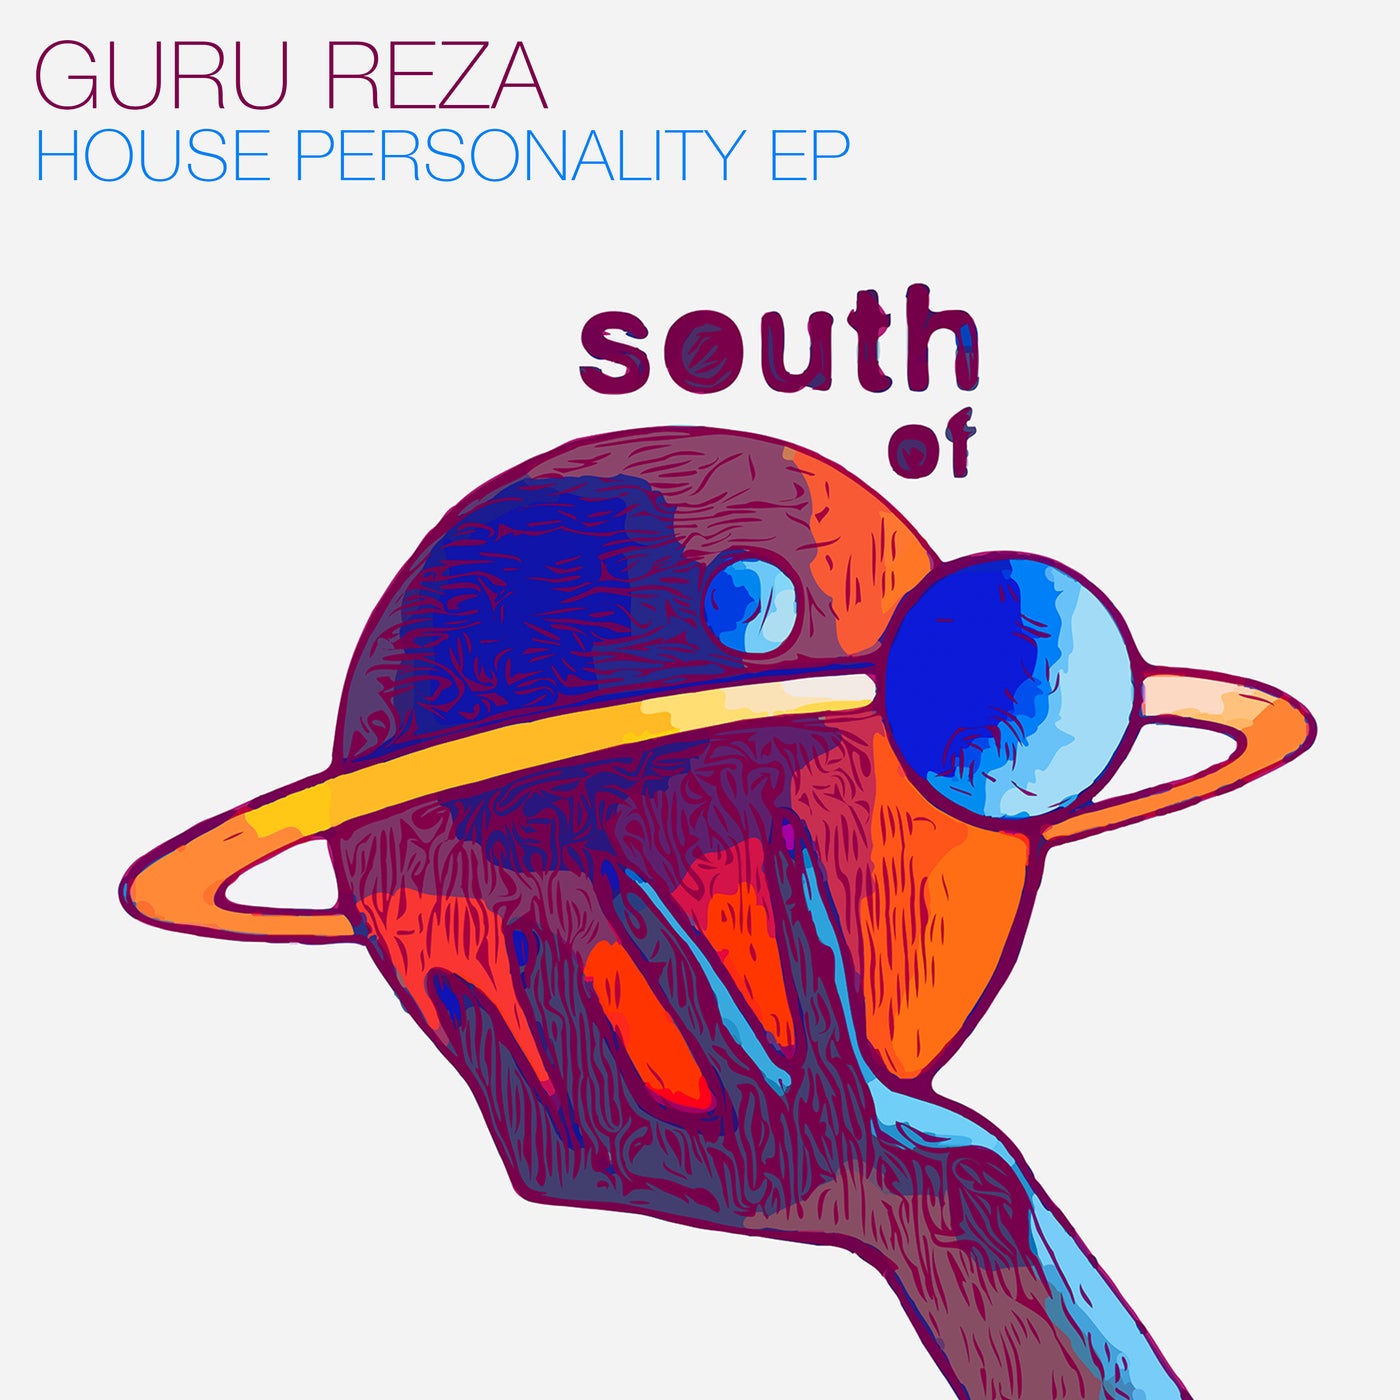 House Personality EP